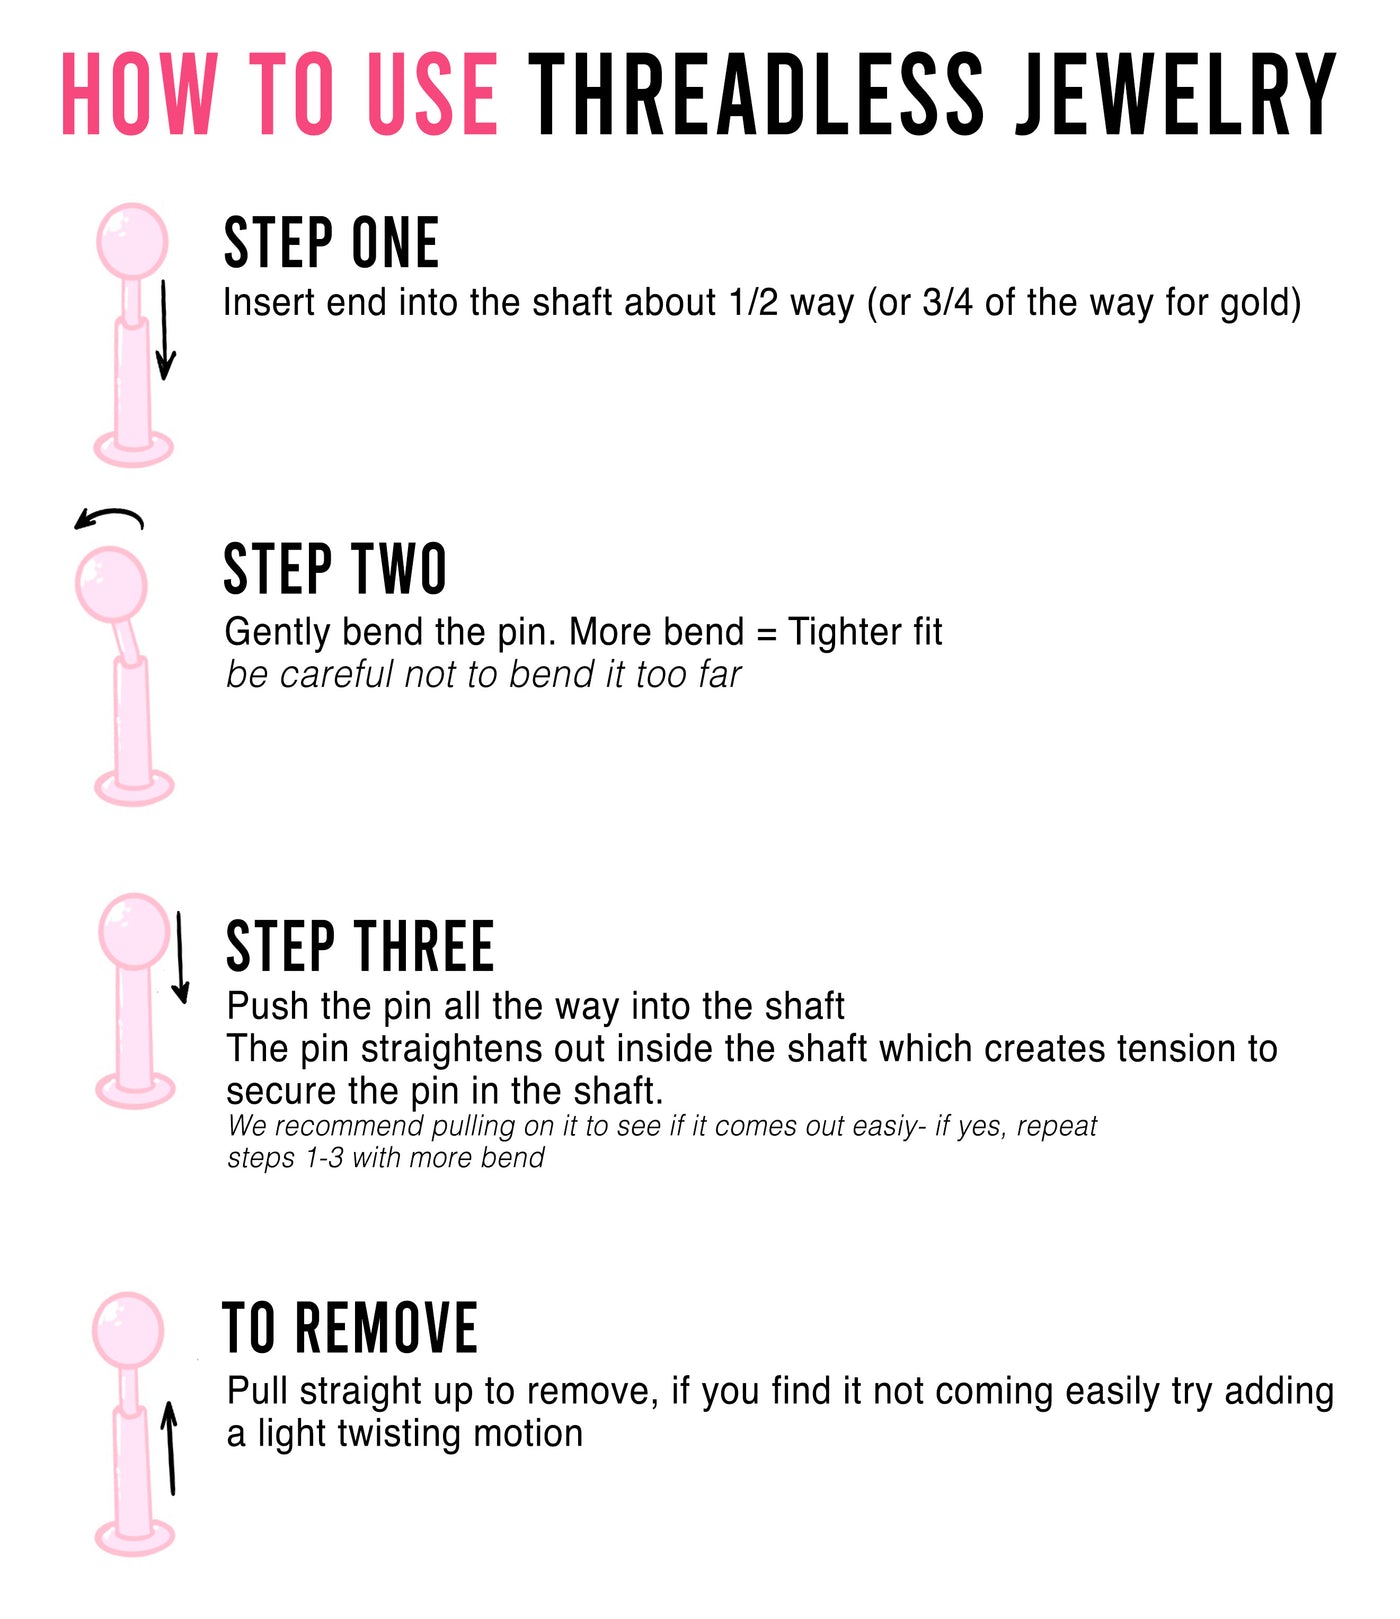 how to remove threadless jewelry for beginners